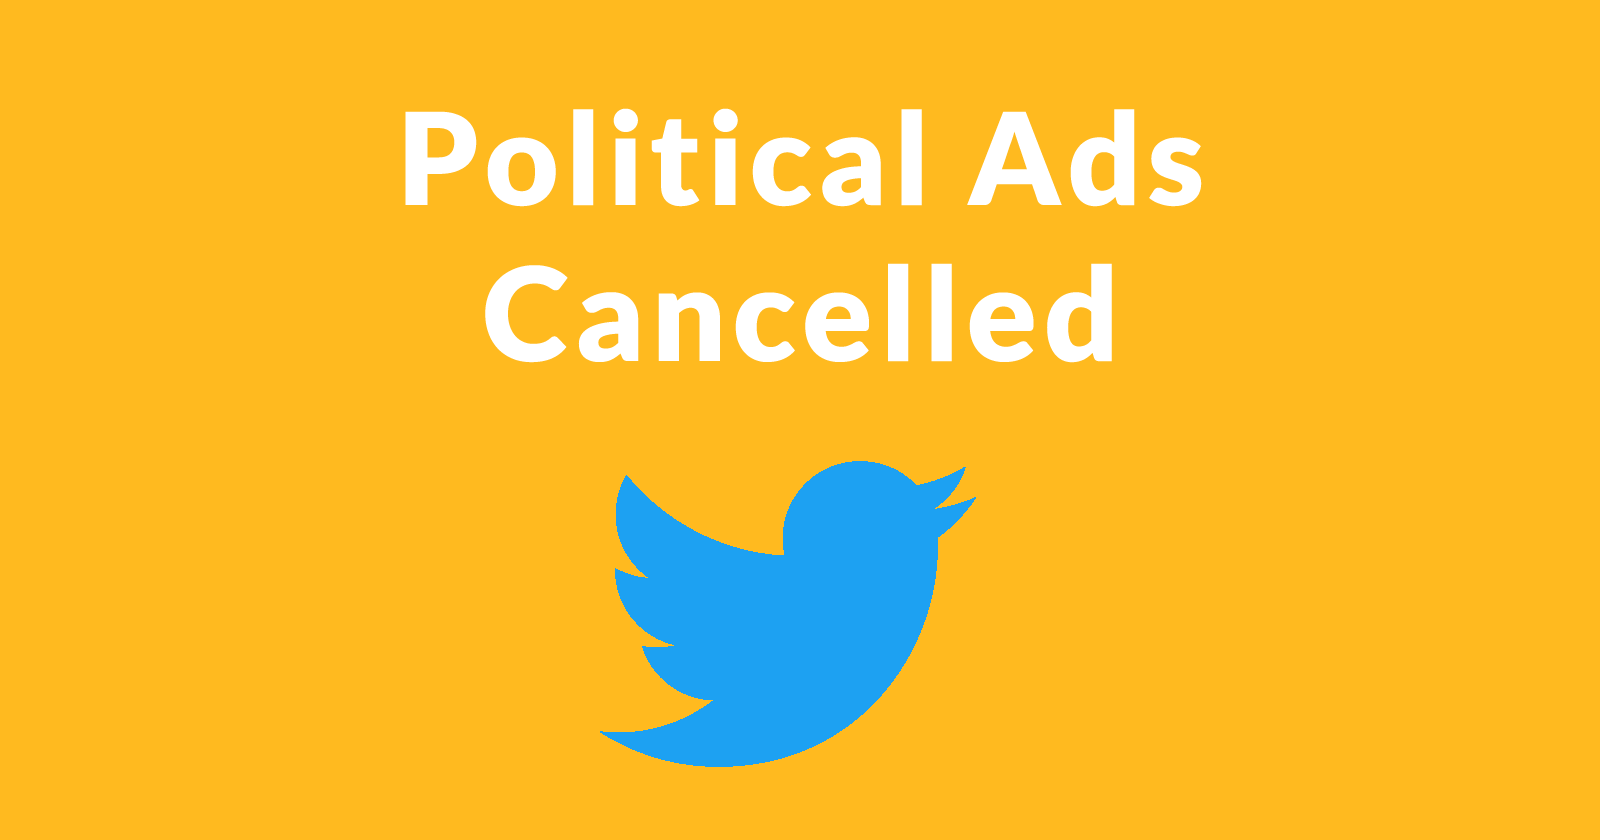 Political ads cancelled